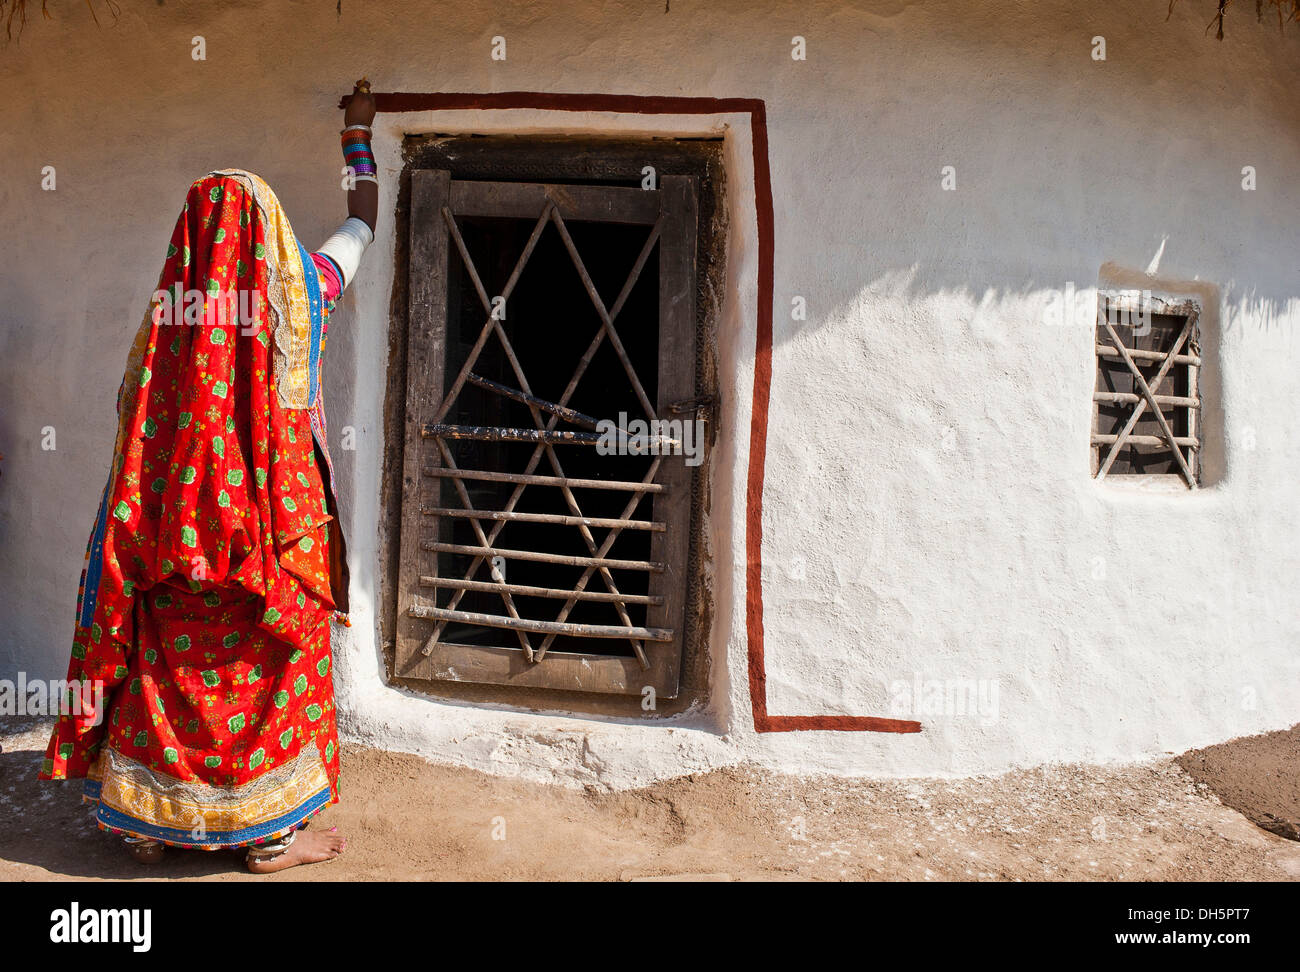 Young Indian woman wearing a traditional sari or saree, painting her front door, Rajasthan, India, Asia Stock Photo